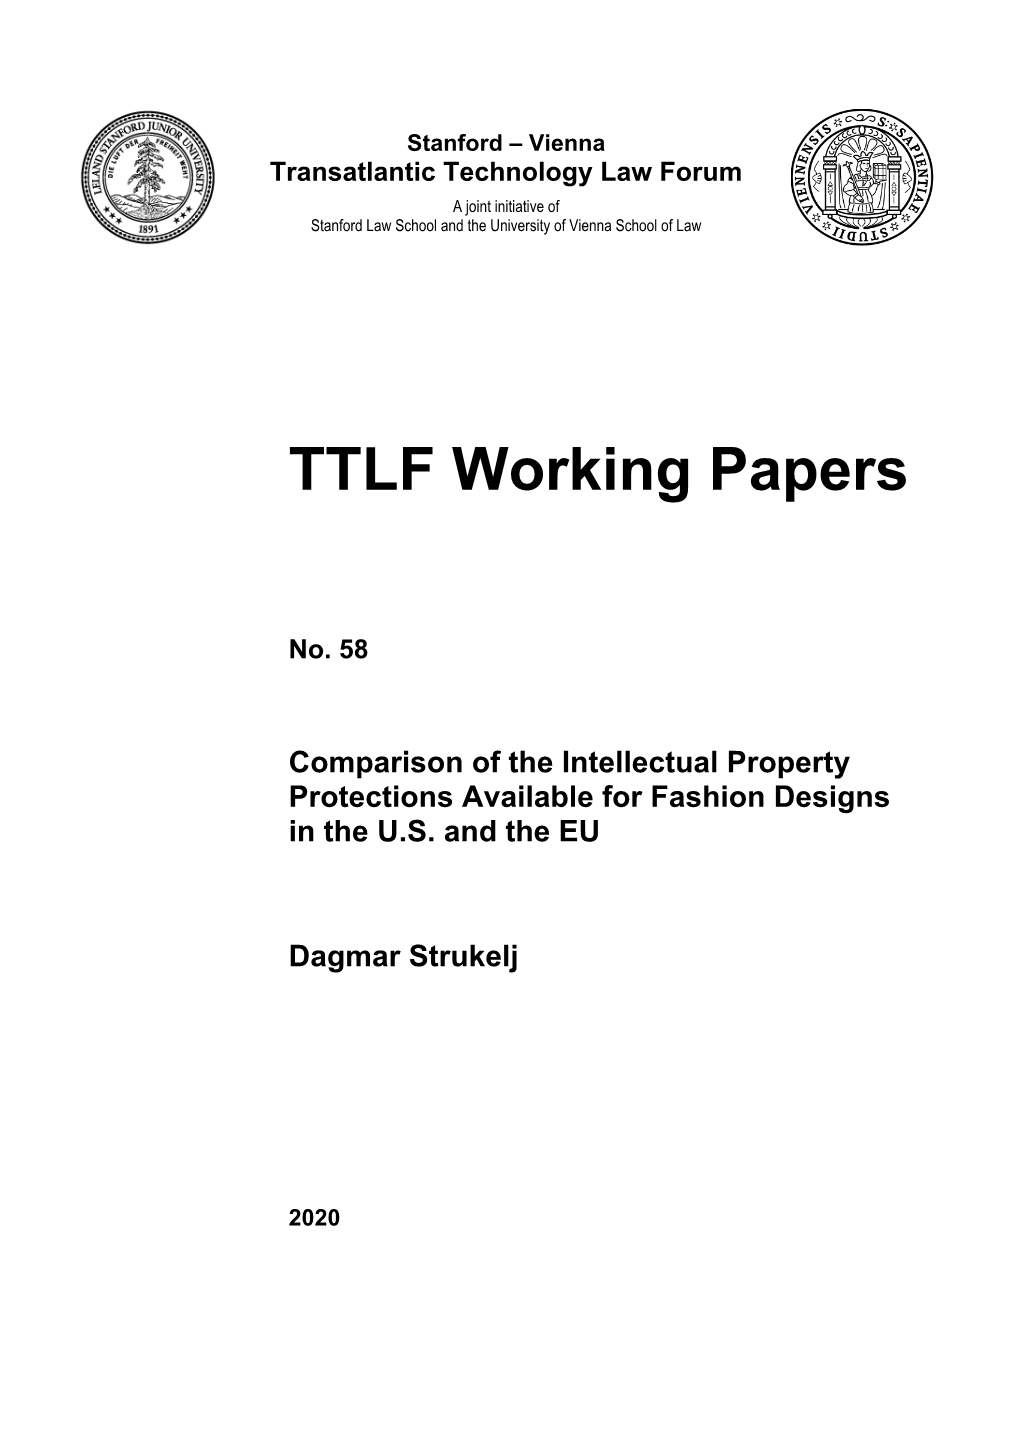 TTLF Working Papers